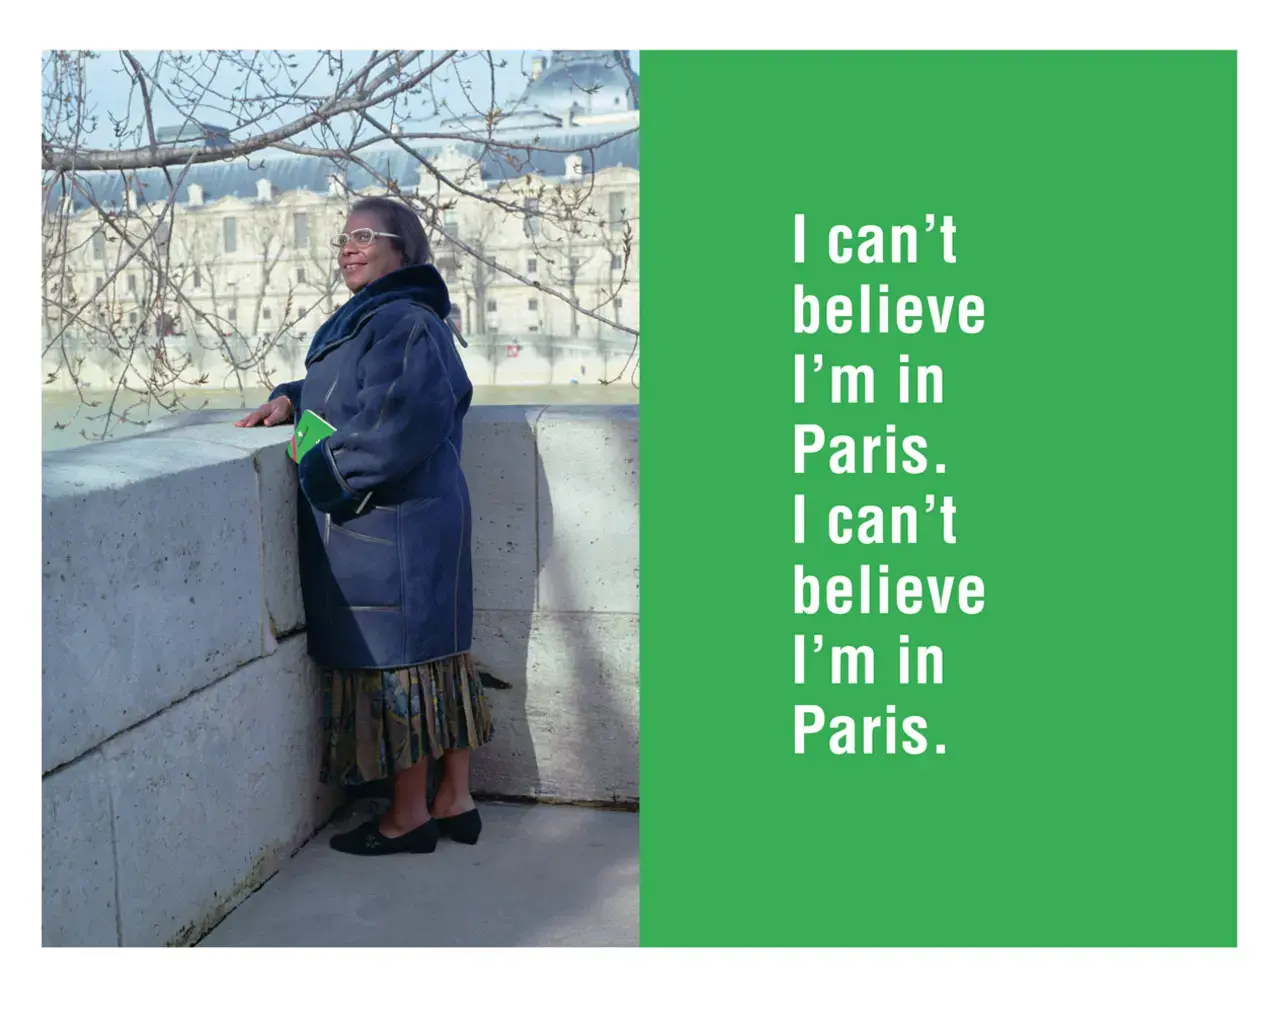 Ken Lum, I can't believe I'm in Paris, 1995, enameled aluminum with archival print. Photo courtesy of the artist.